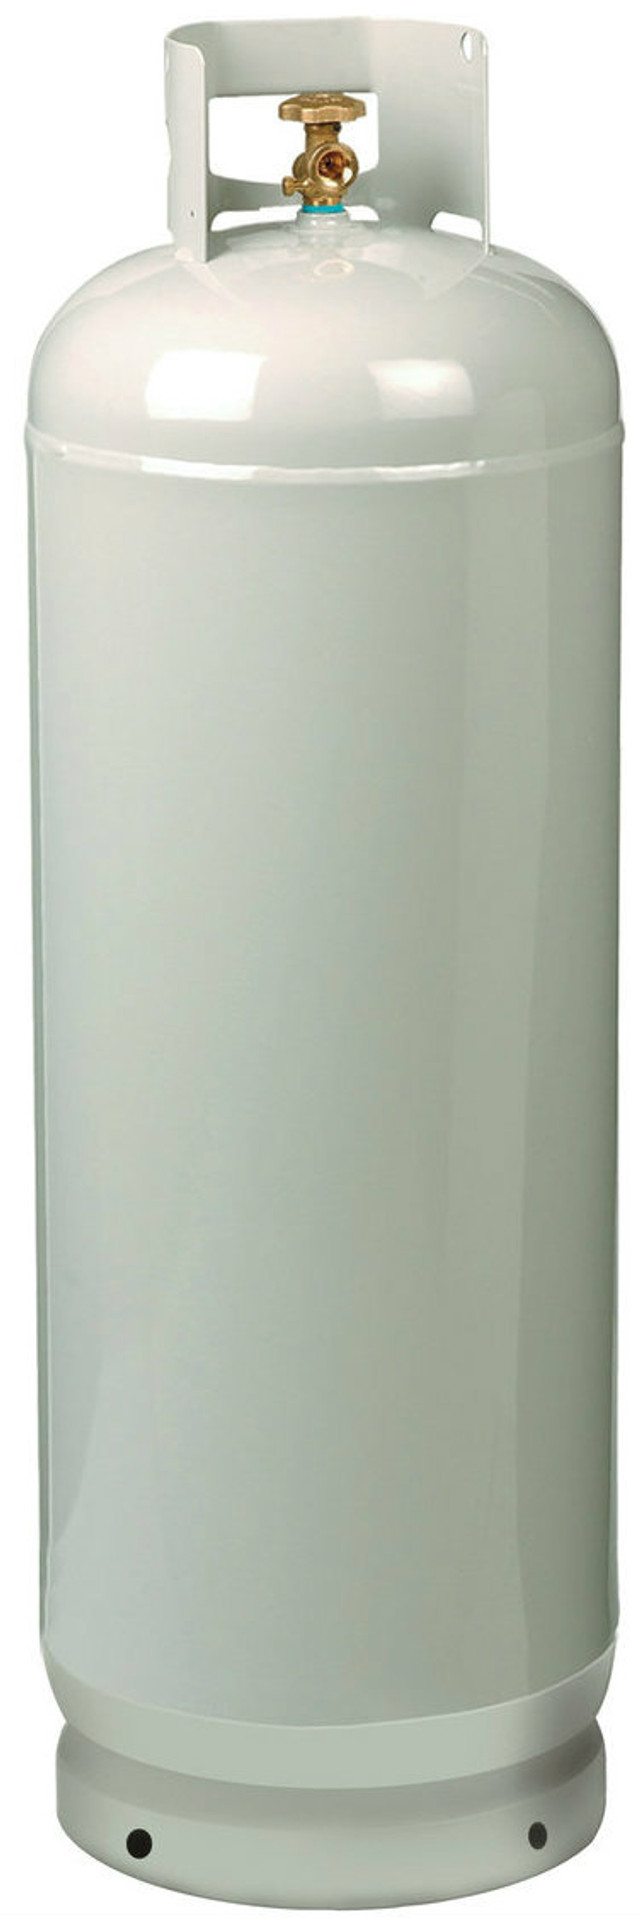 60 lb Cylinder with High Collar - Portable Cylinders 4-100lb